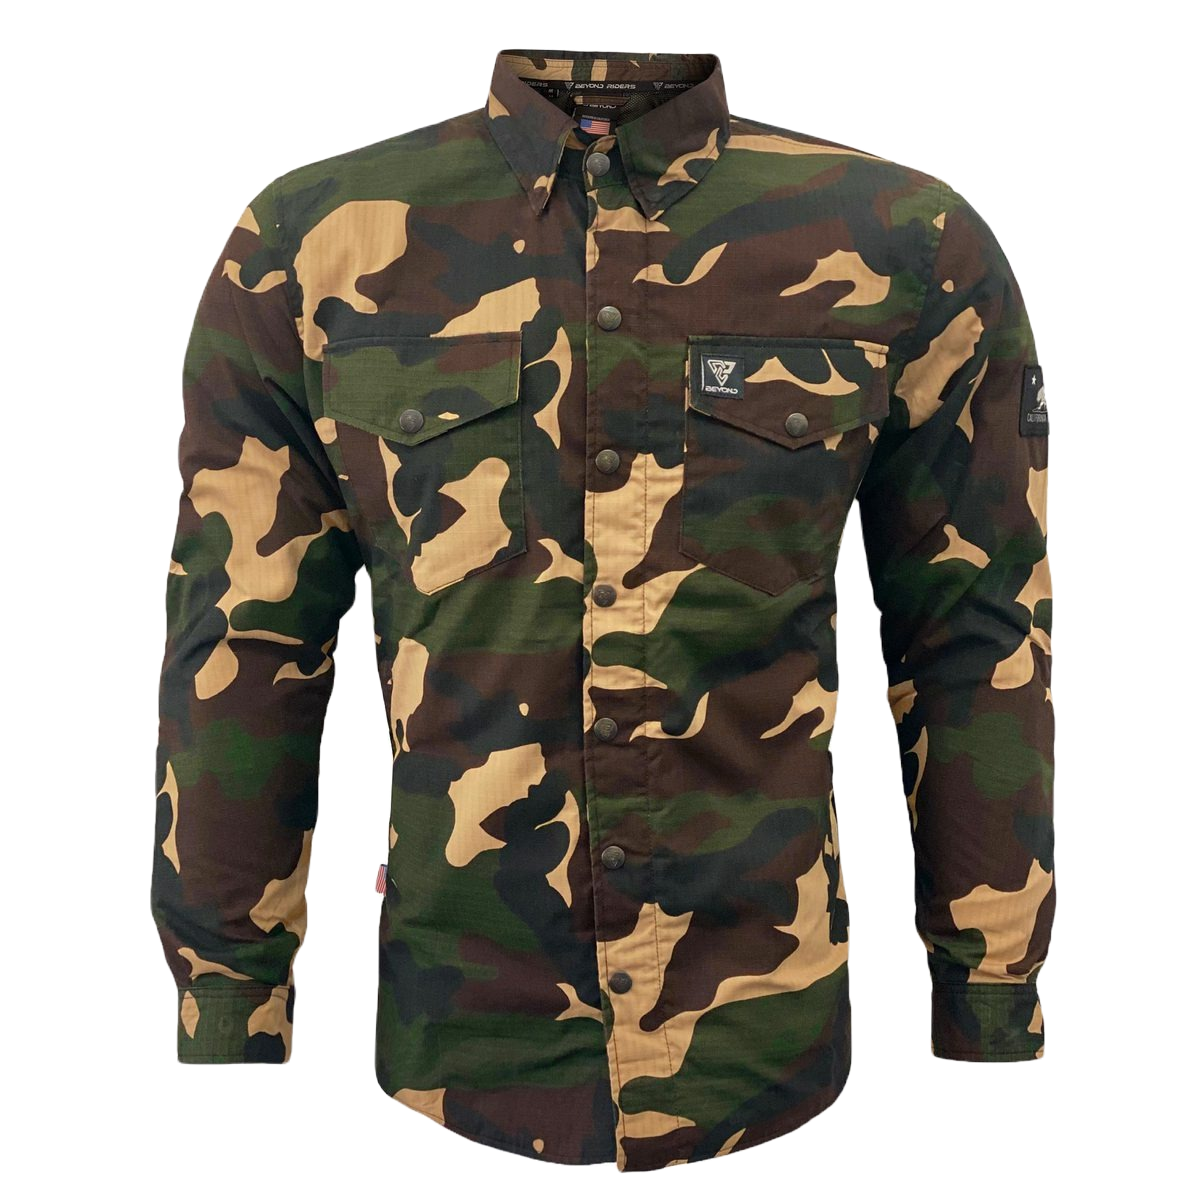 Protective Camouflage Shirt "Knight Hawk" - with Level 1 Pads